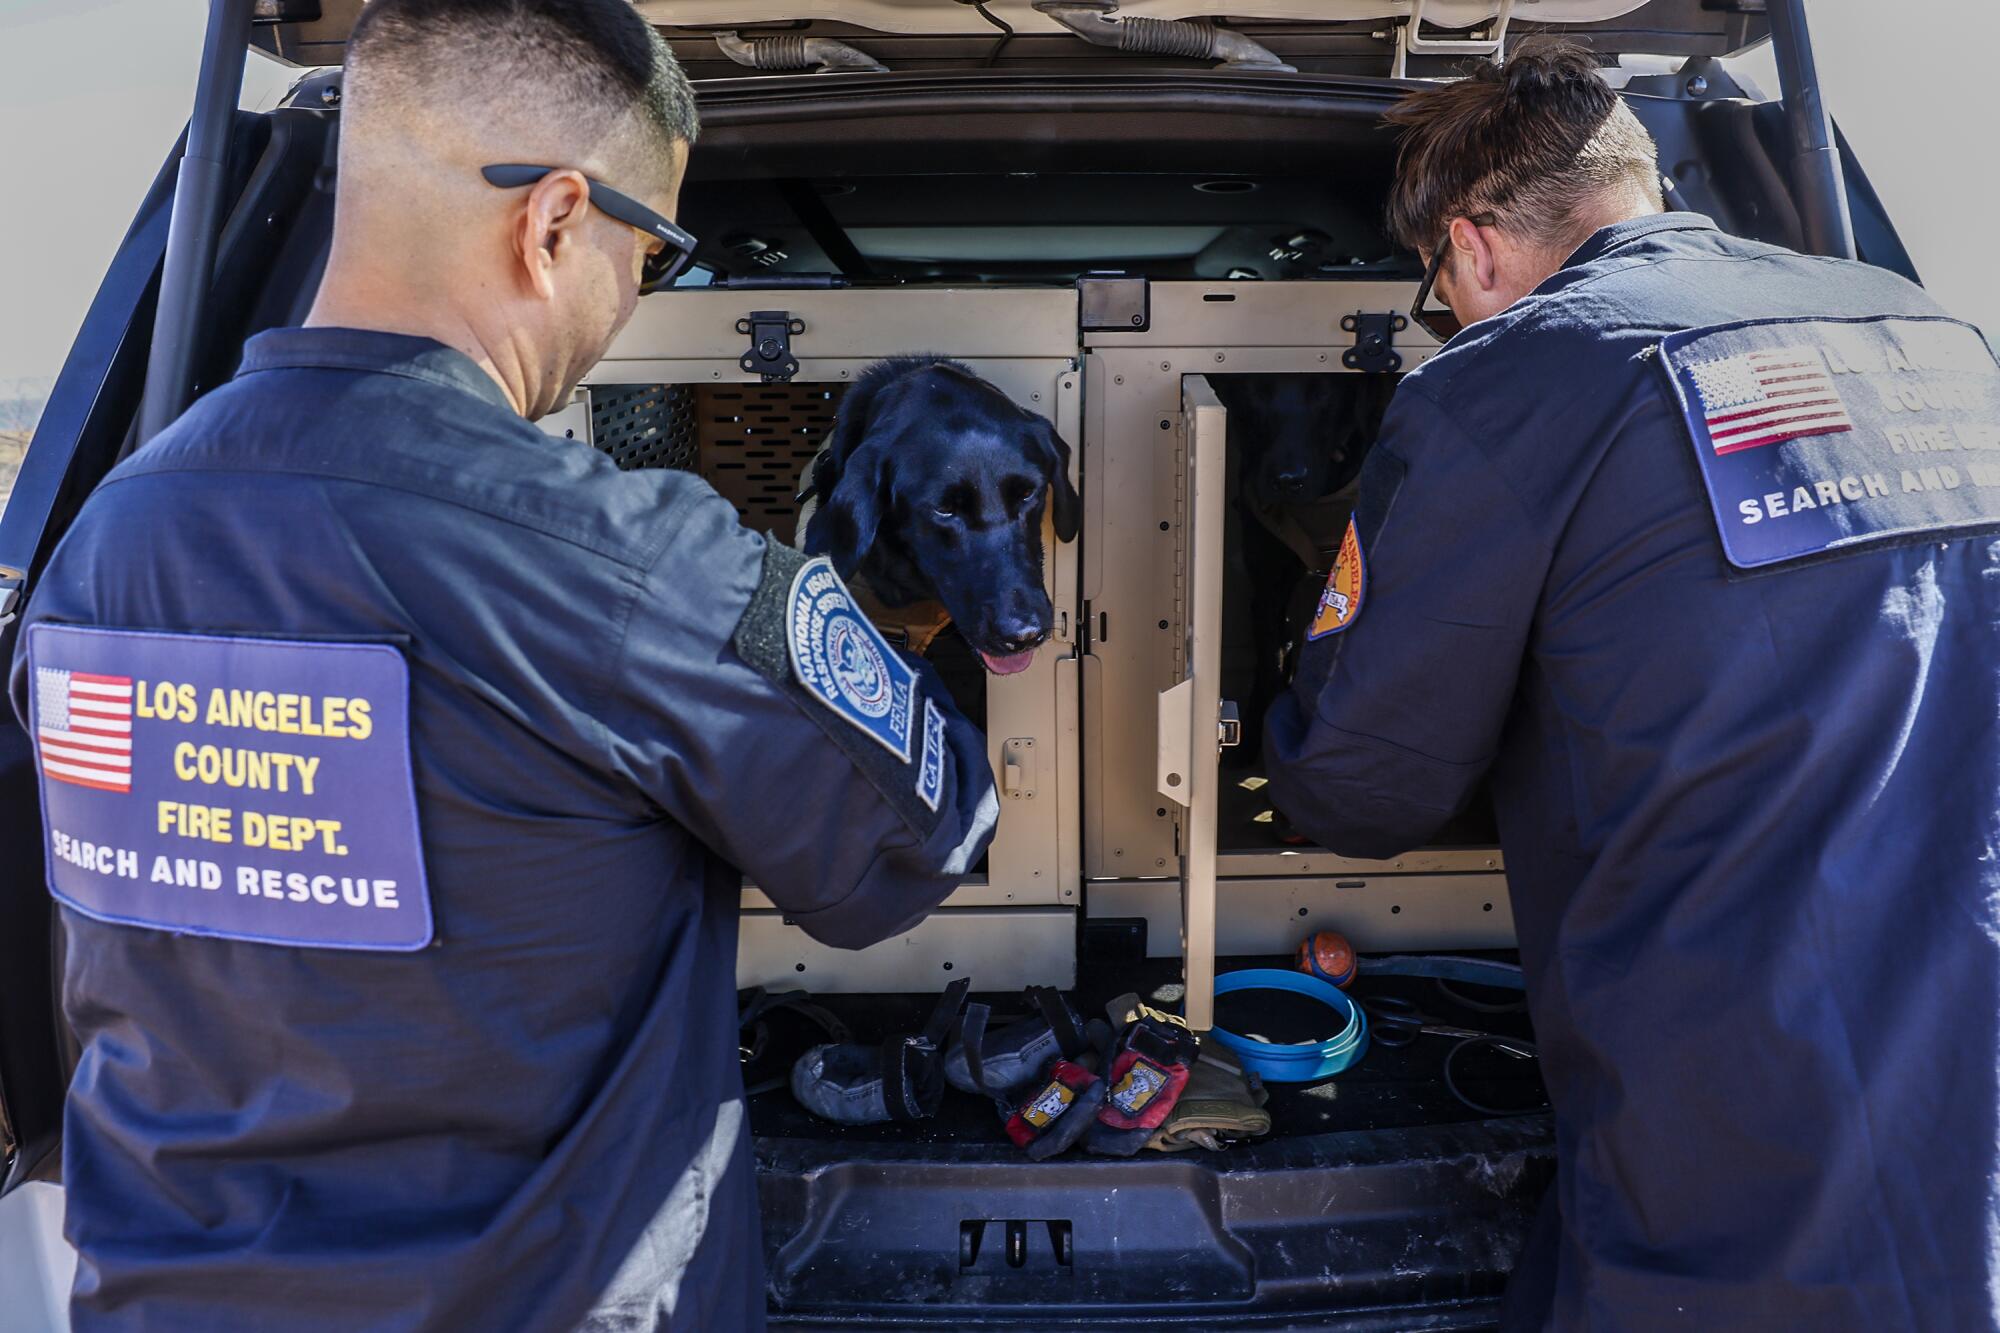 Search-and-rescue team members help two dogs into crates.